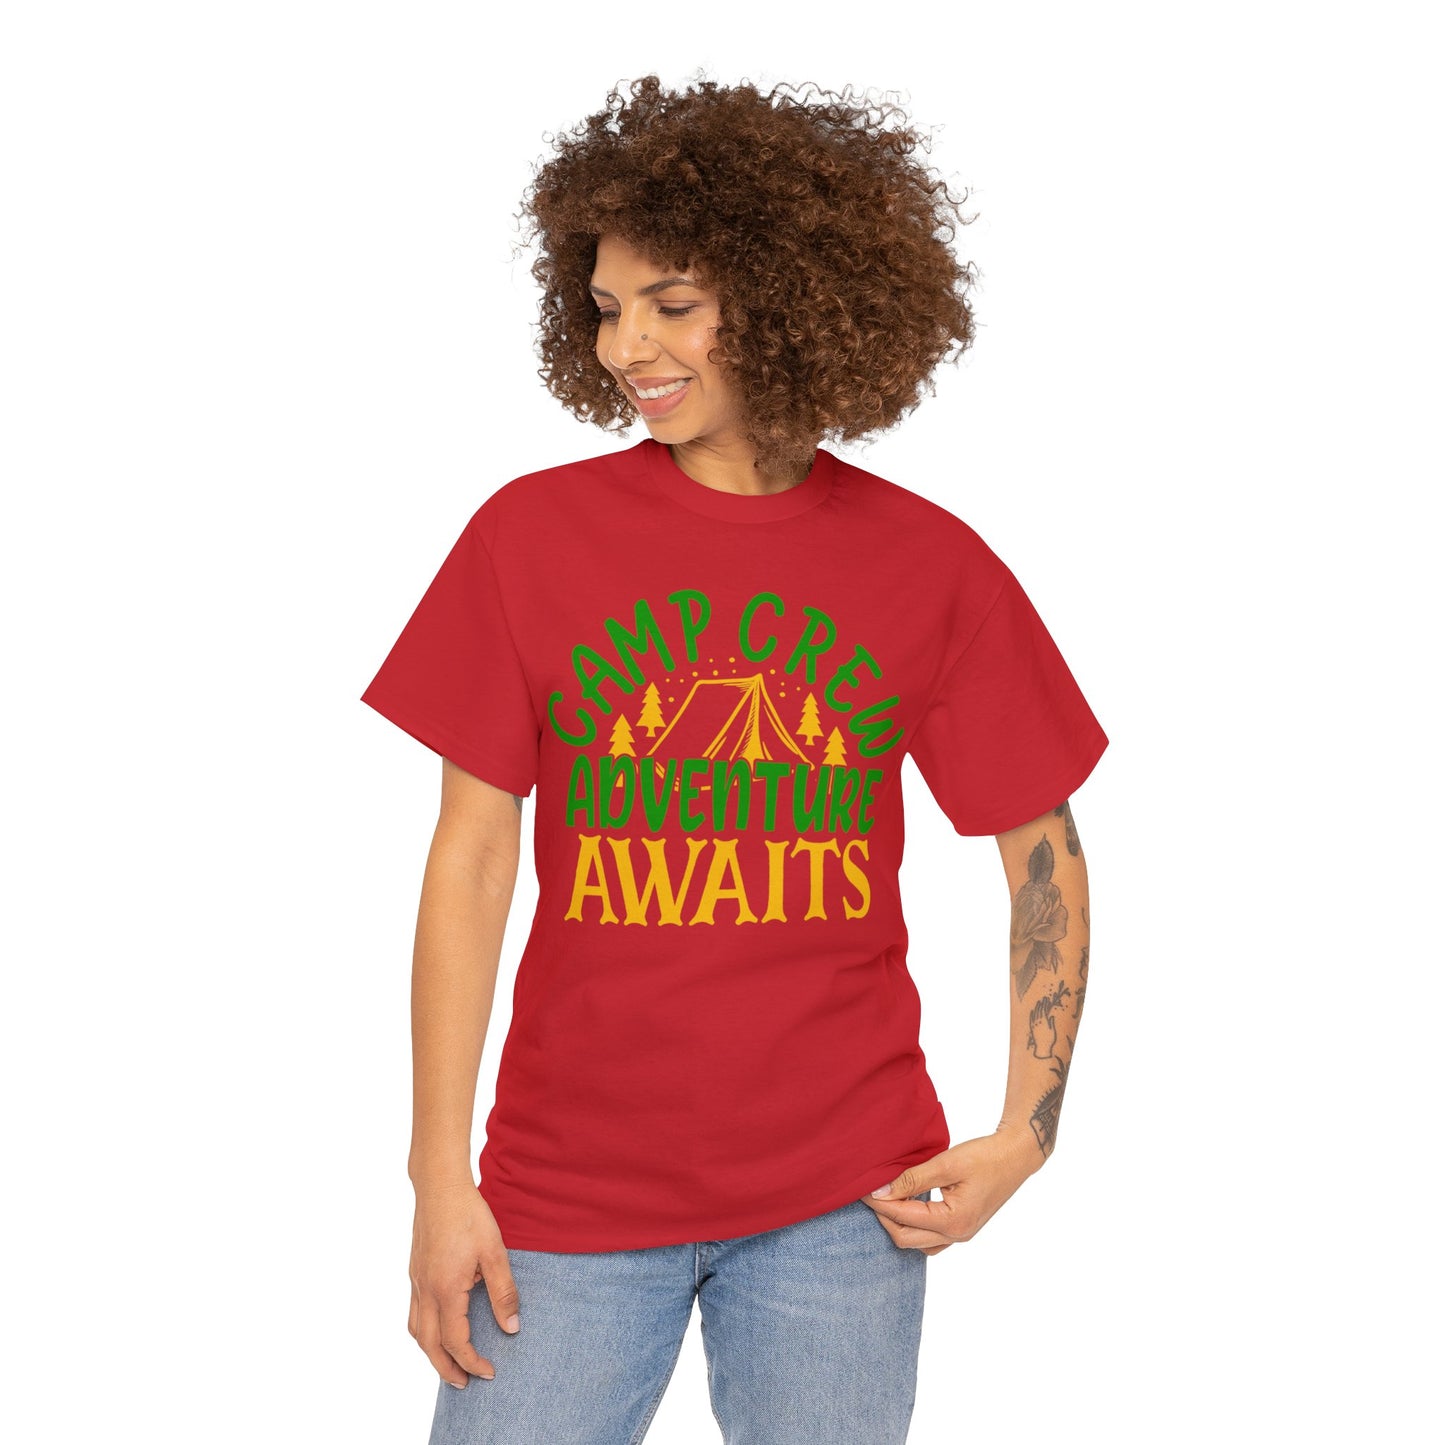 Camp Crew Adventure Awaits' T-Shirt - Your Ultimate Outdoor Companion!